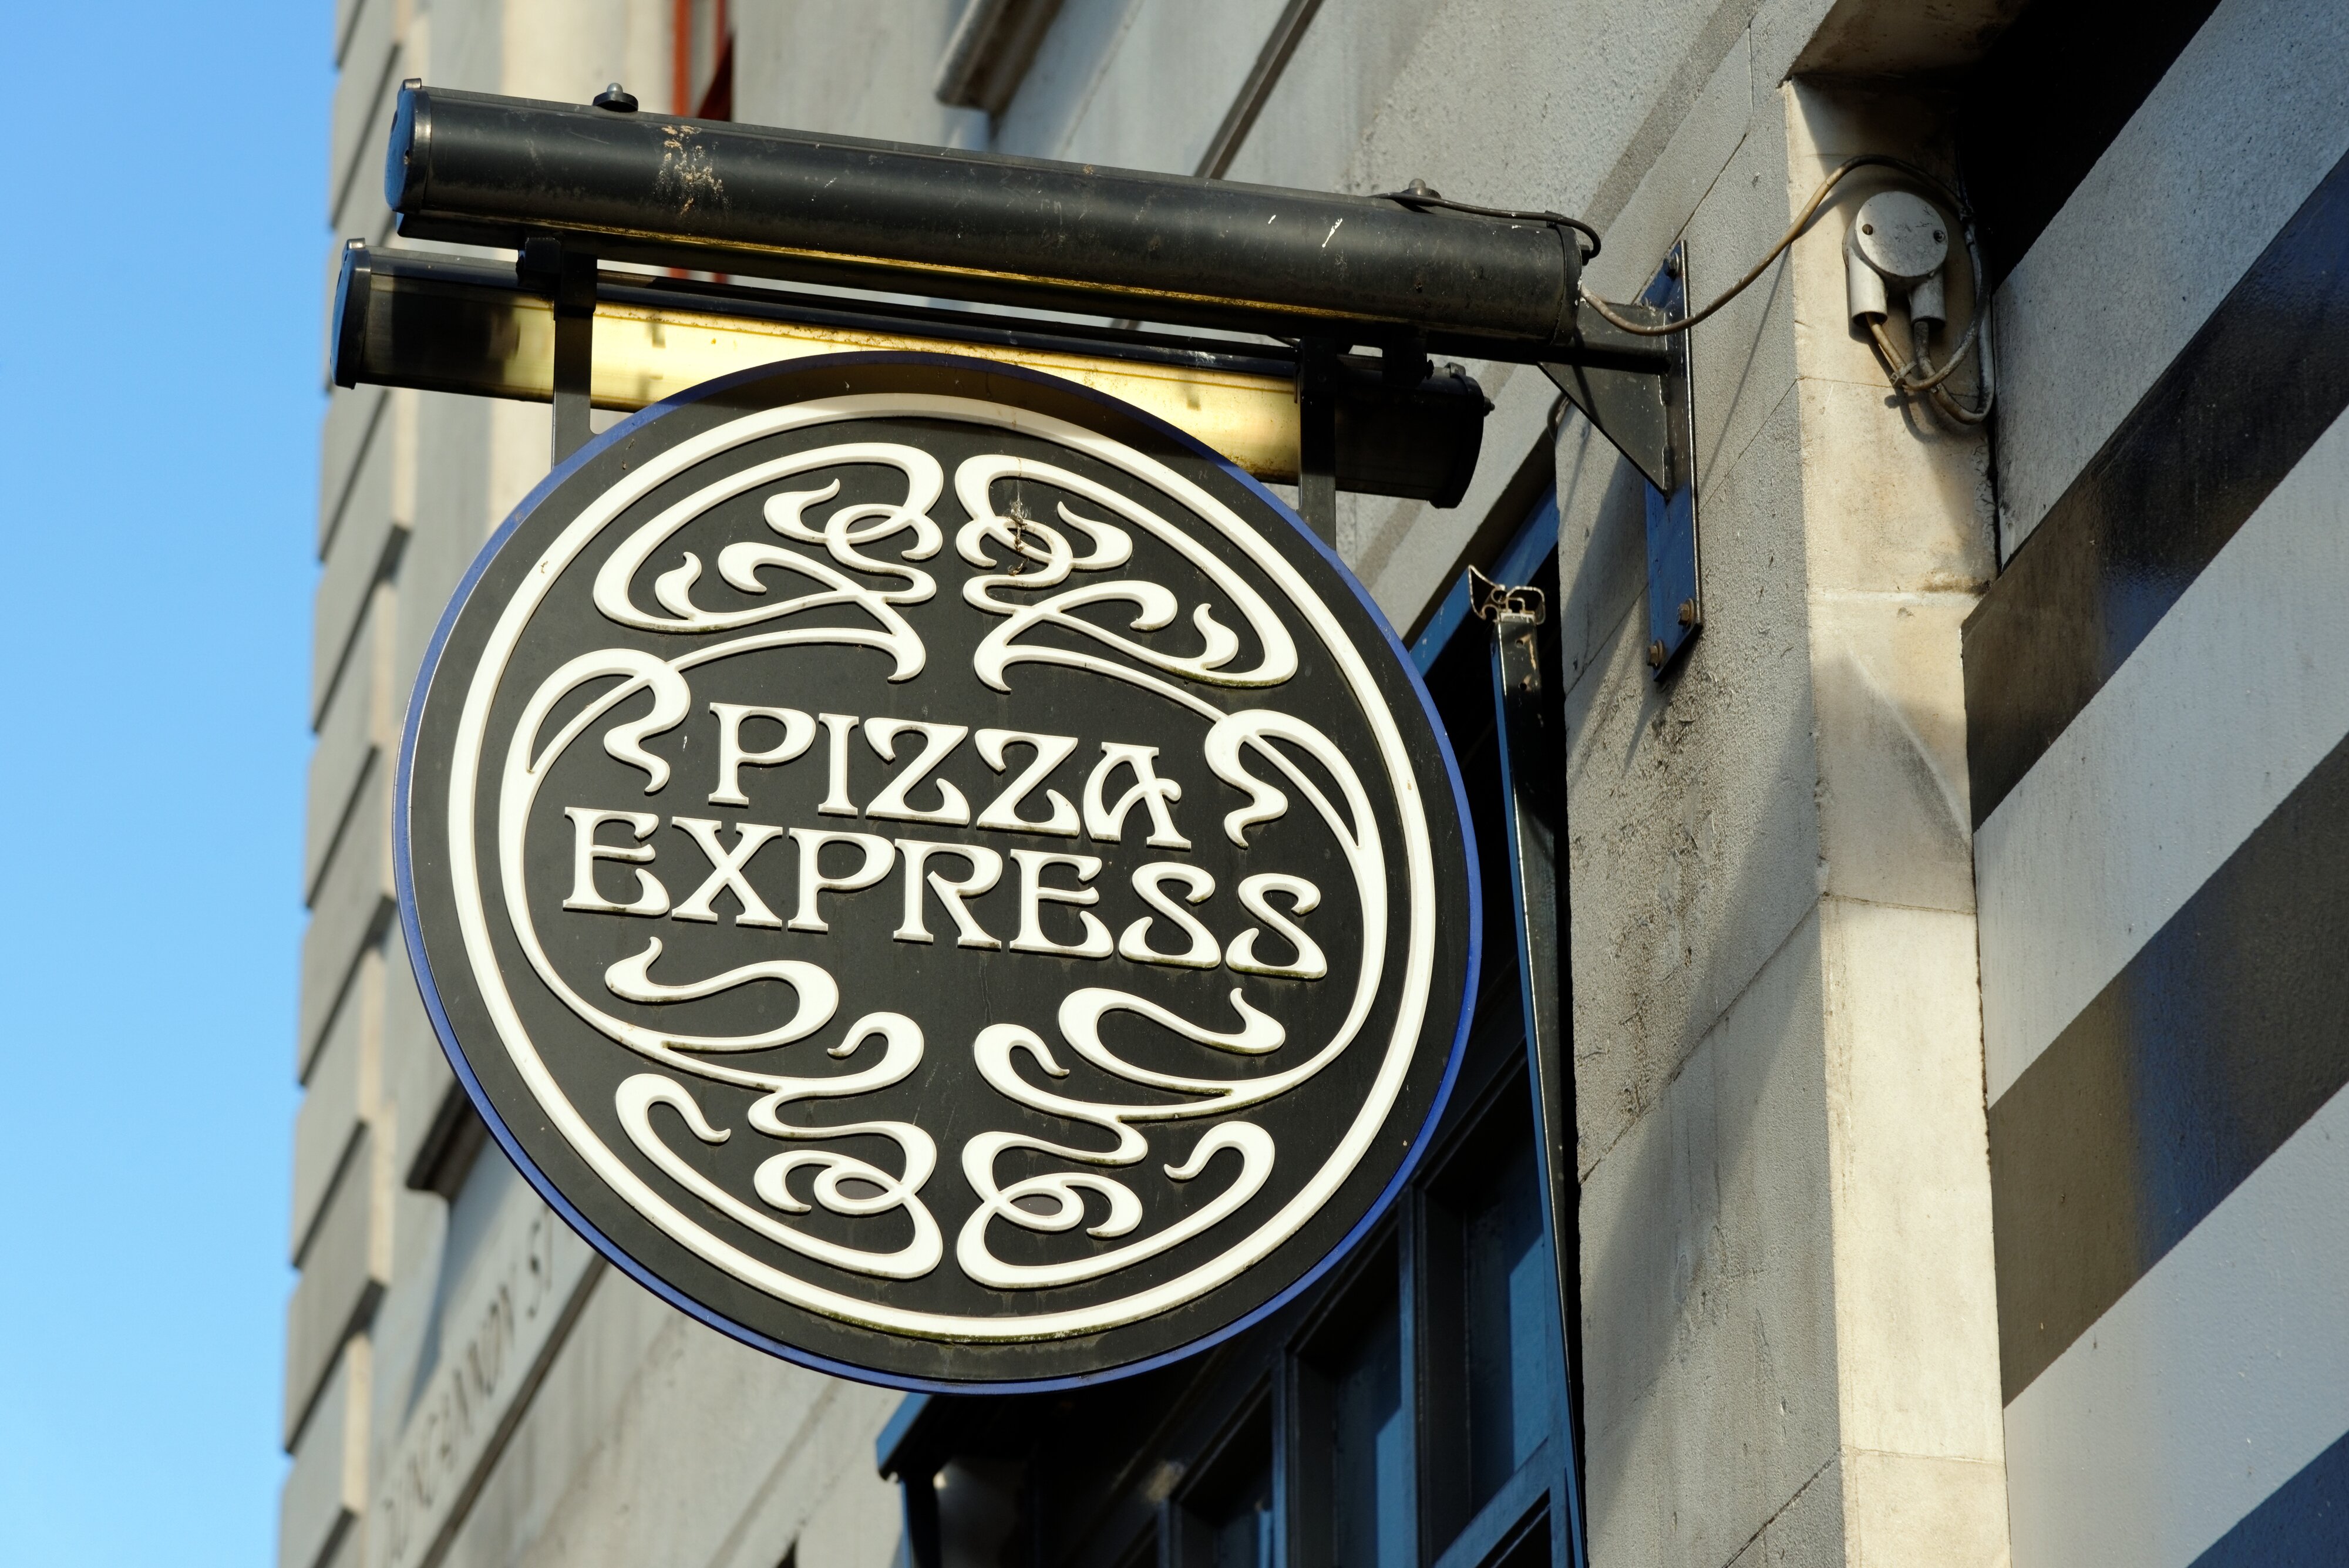 Thousands sign petition protesting PizzaExpress rota changes